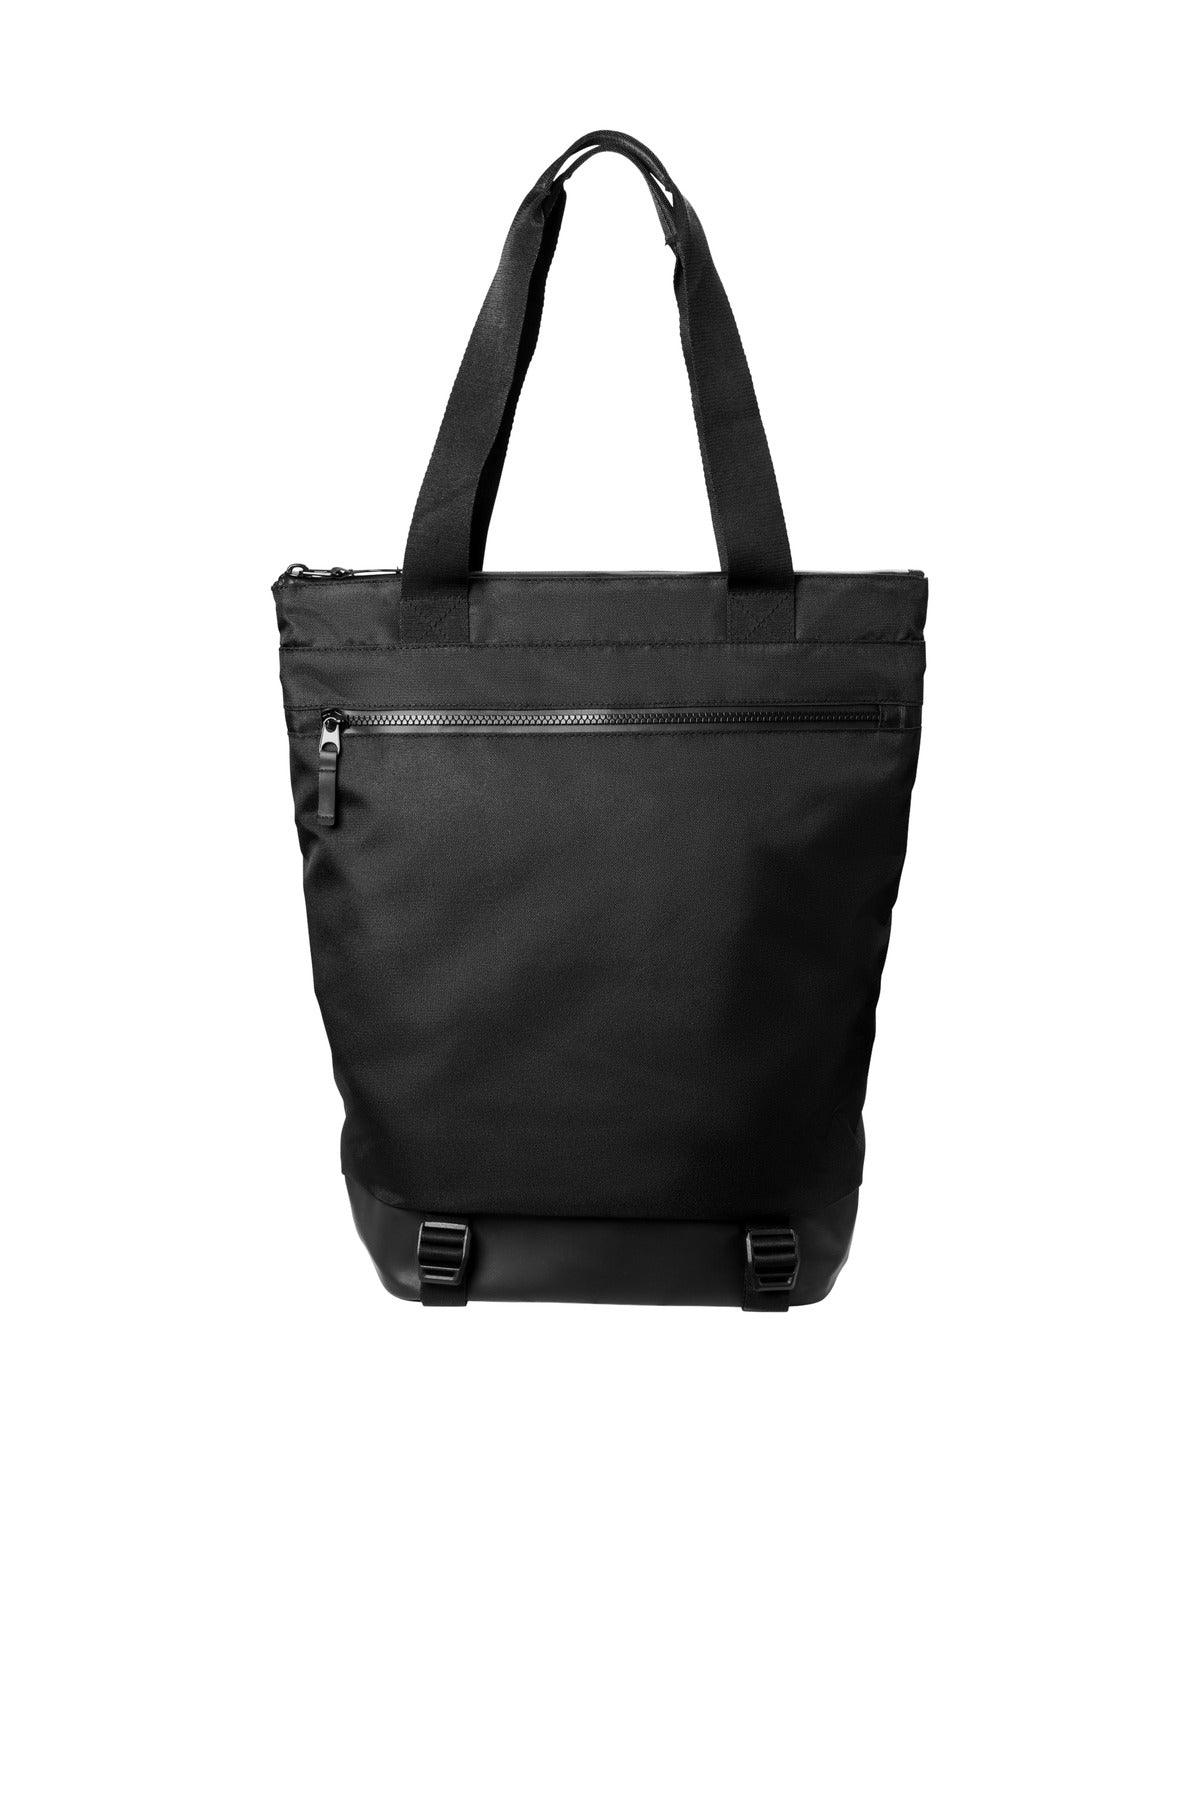 Mercer+Mettle Convertible Tote MMB202 - Dresses Max